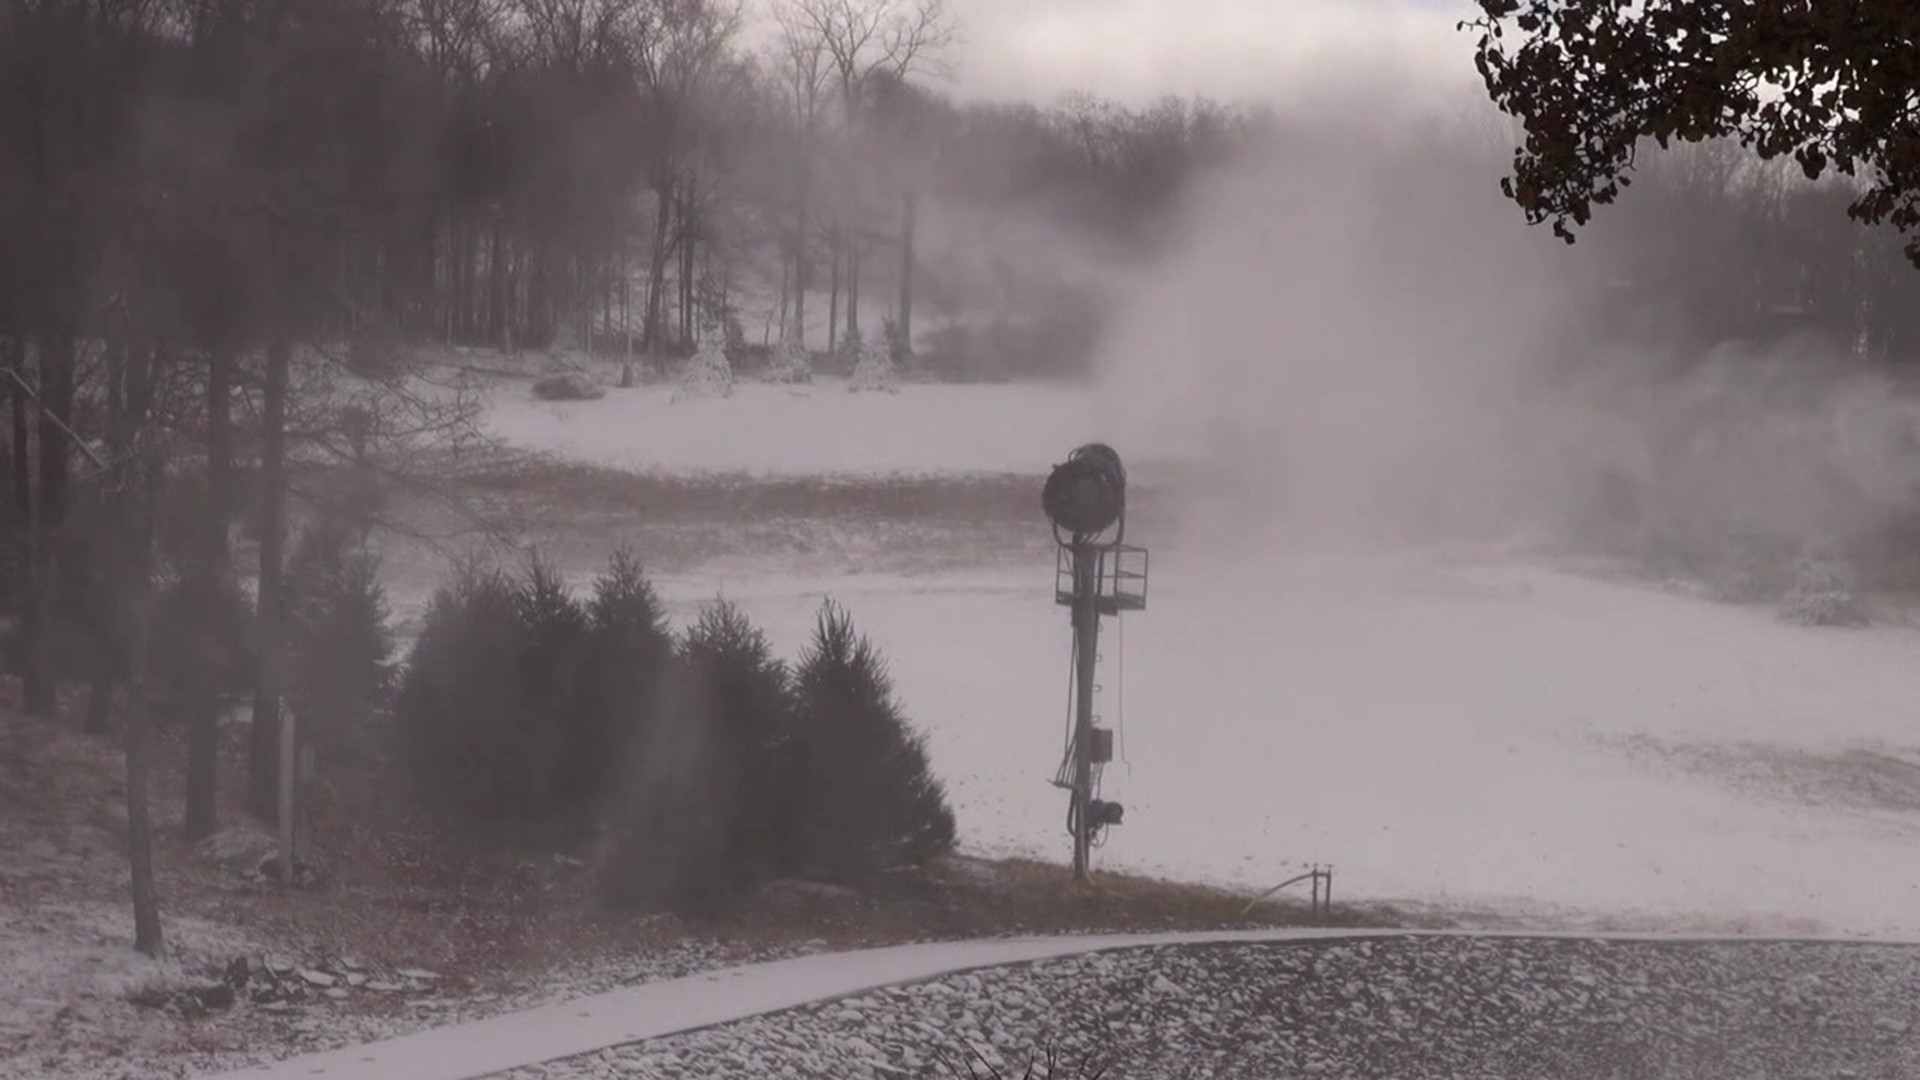 Ski resorts around the area have started making their own snow this week as the temperatures have dropped.